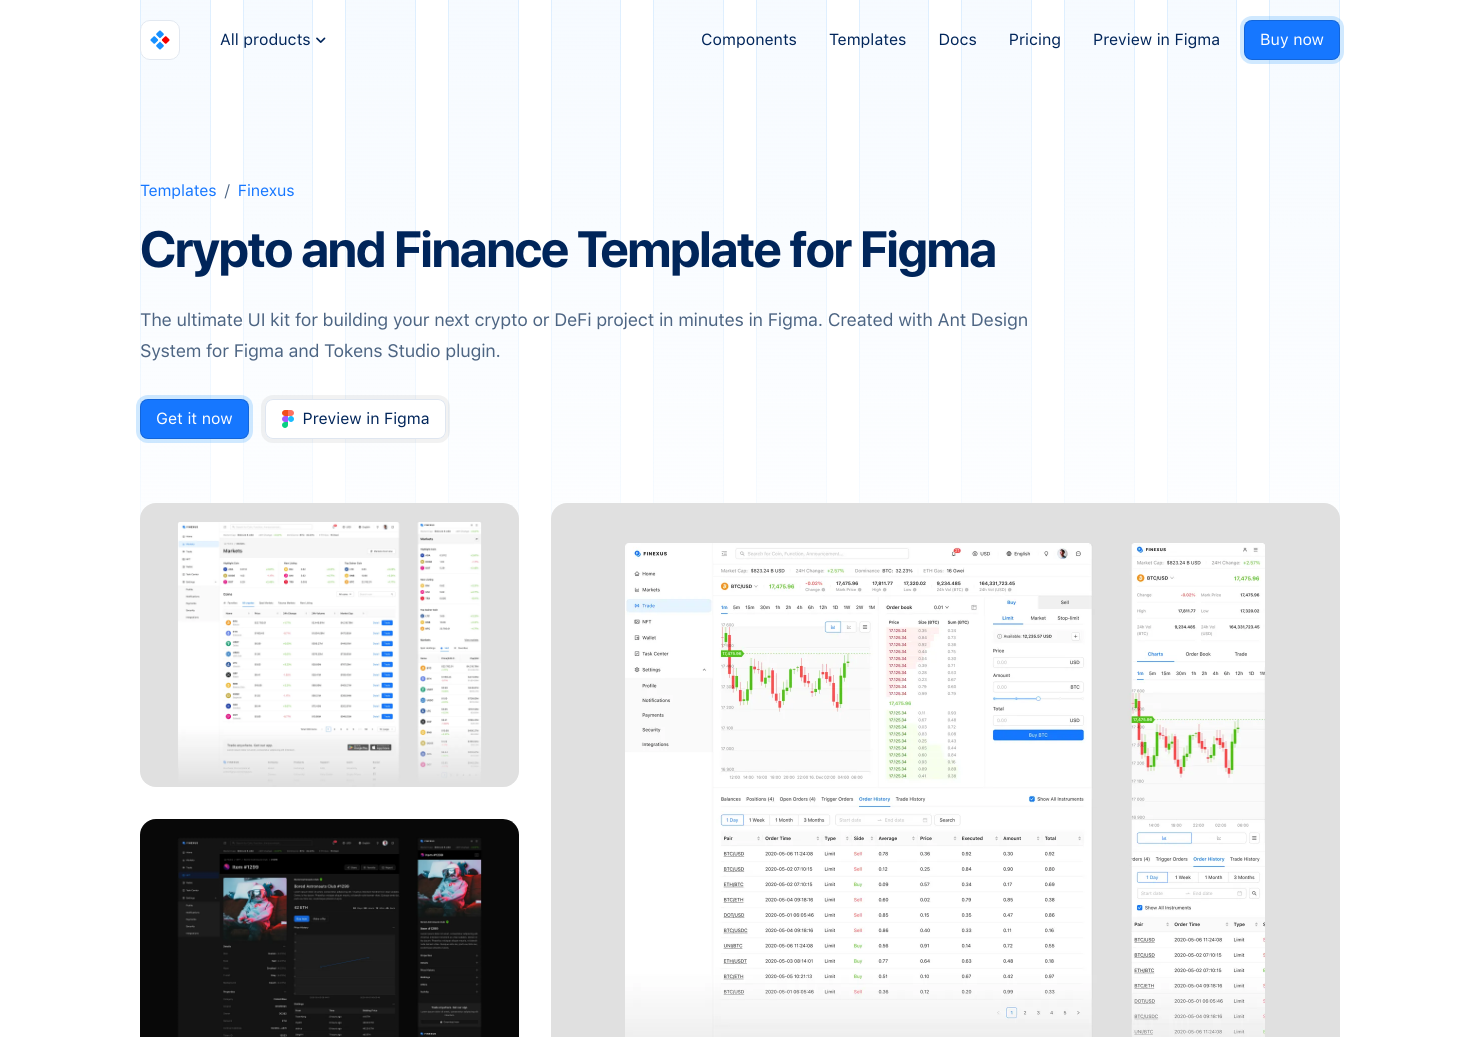 startuptile Crypto and Finance Template for Figma-Design your next crypto or DeFi project in minutes.